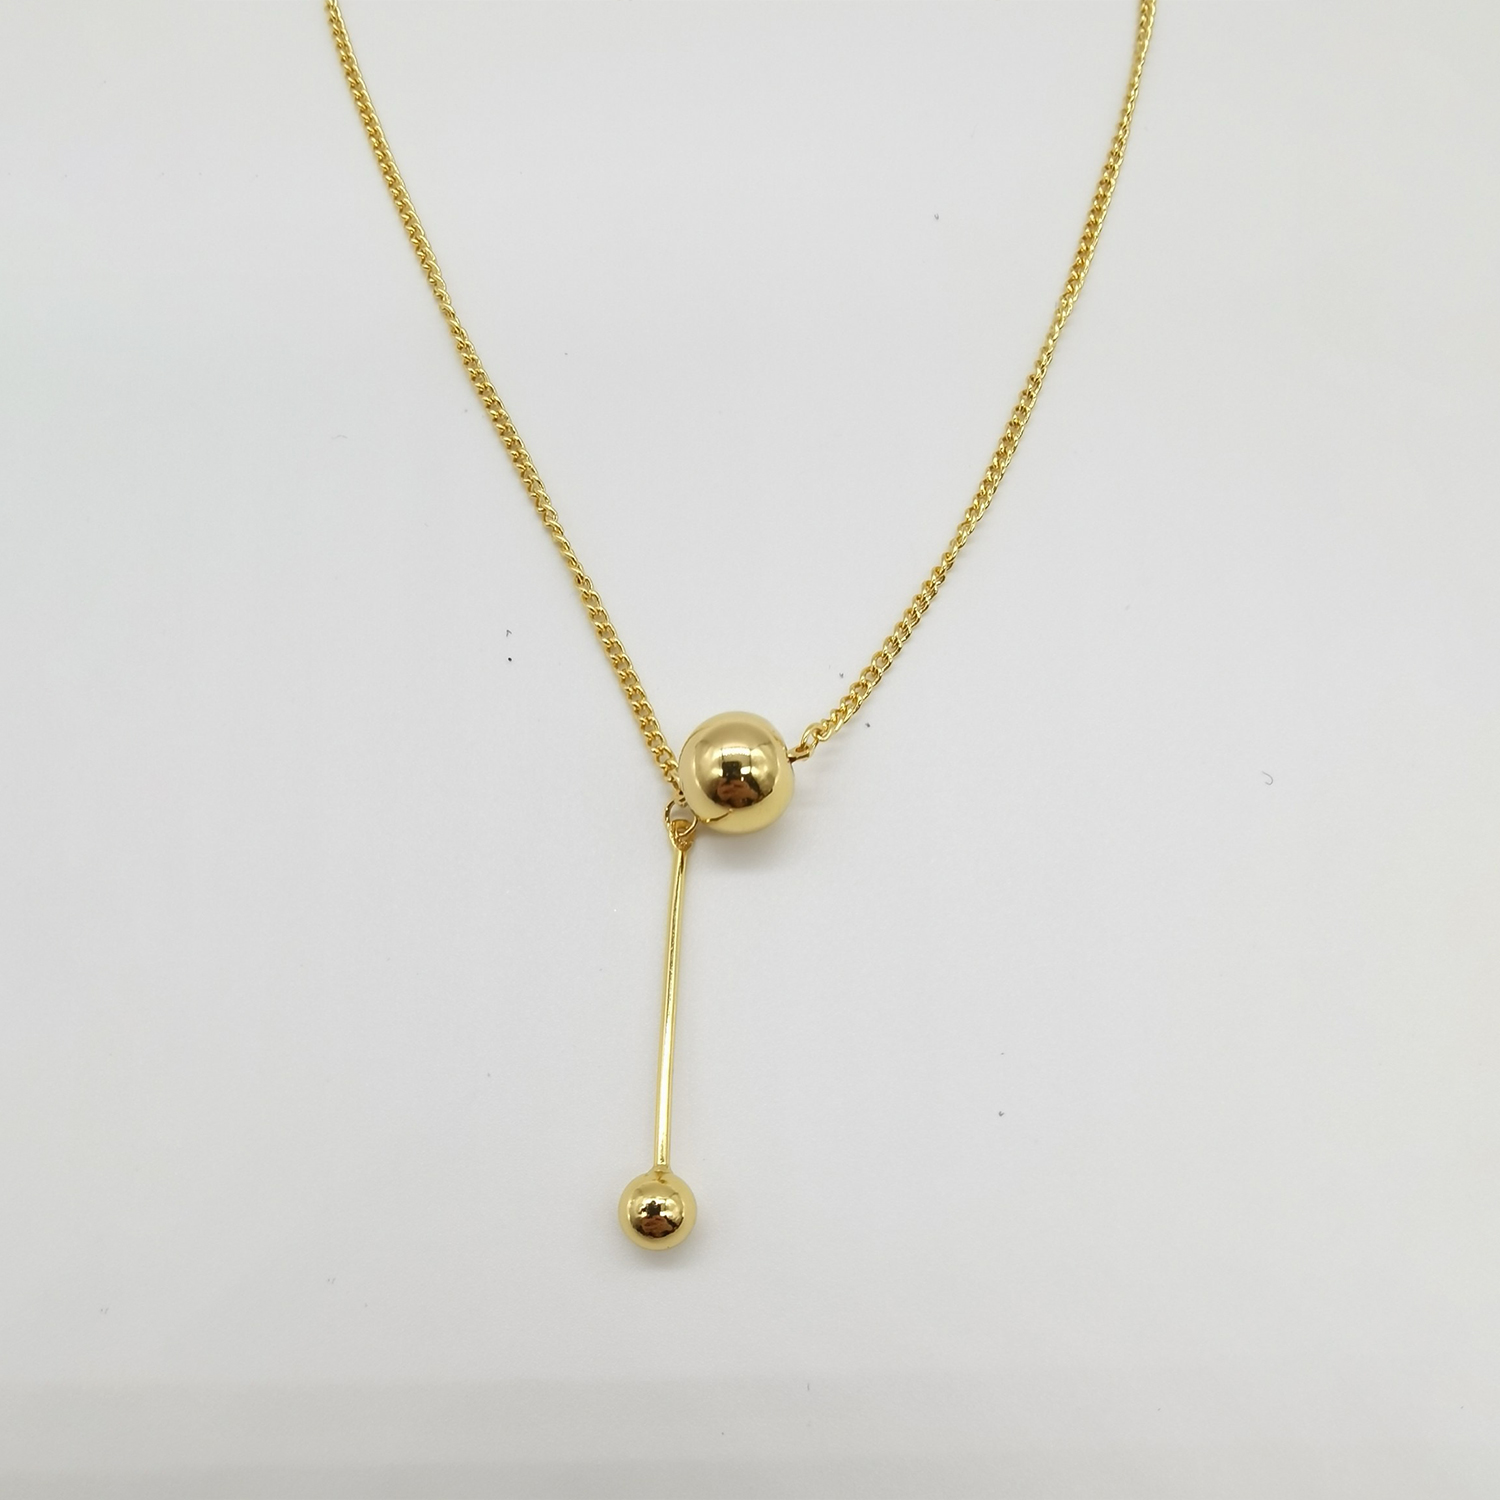 Alluvial gold vacuum electroplating 24K gold small ball tassel necklace